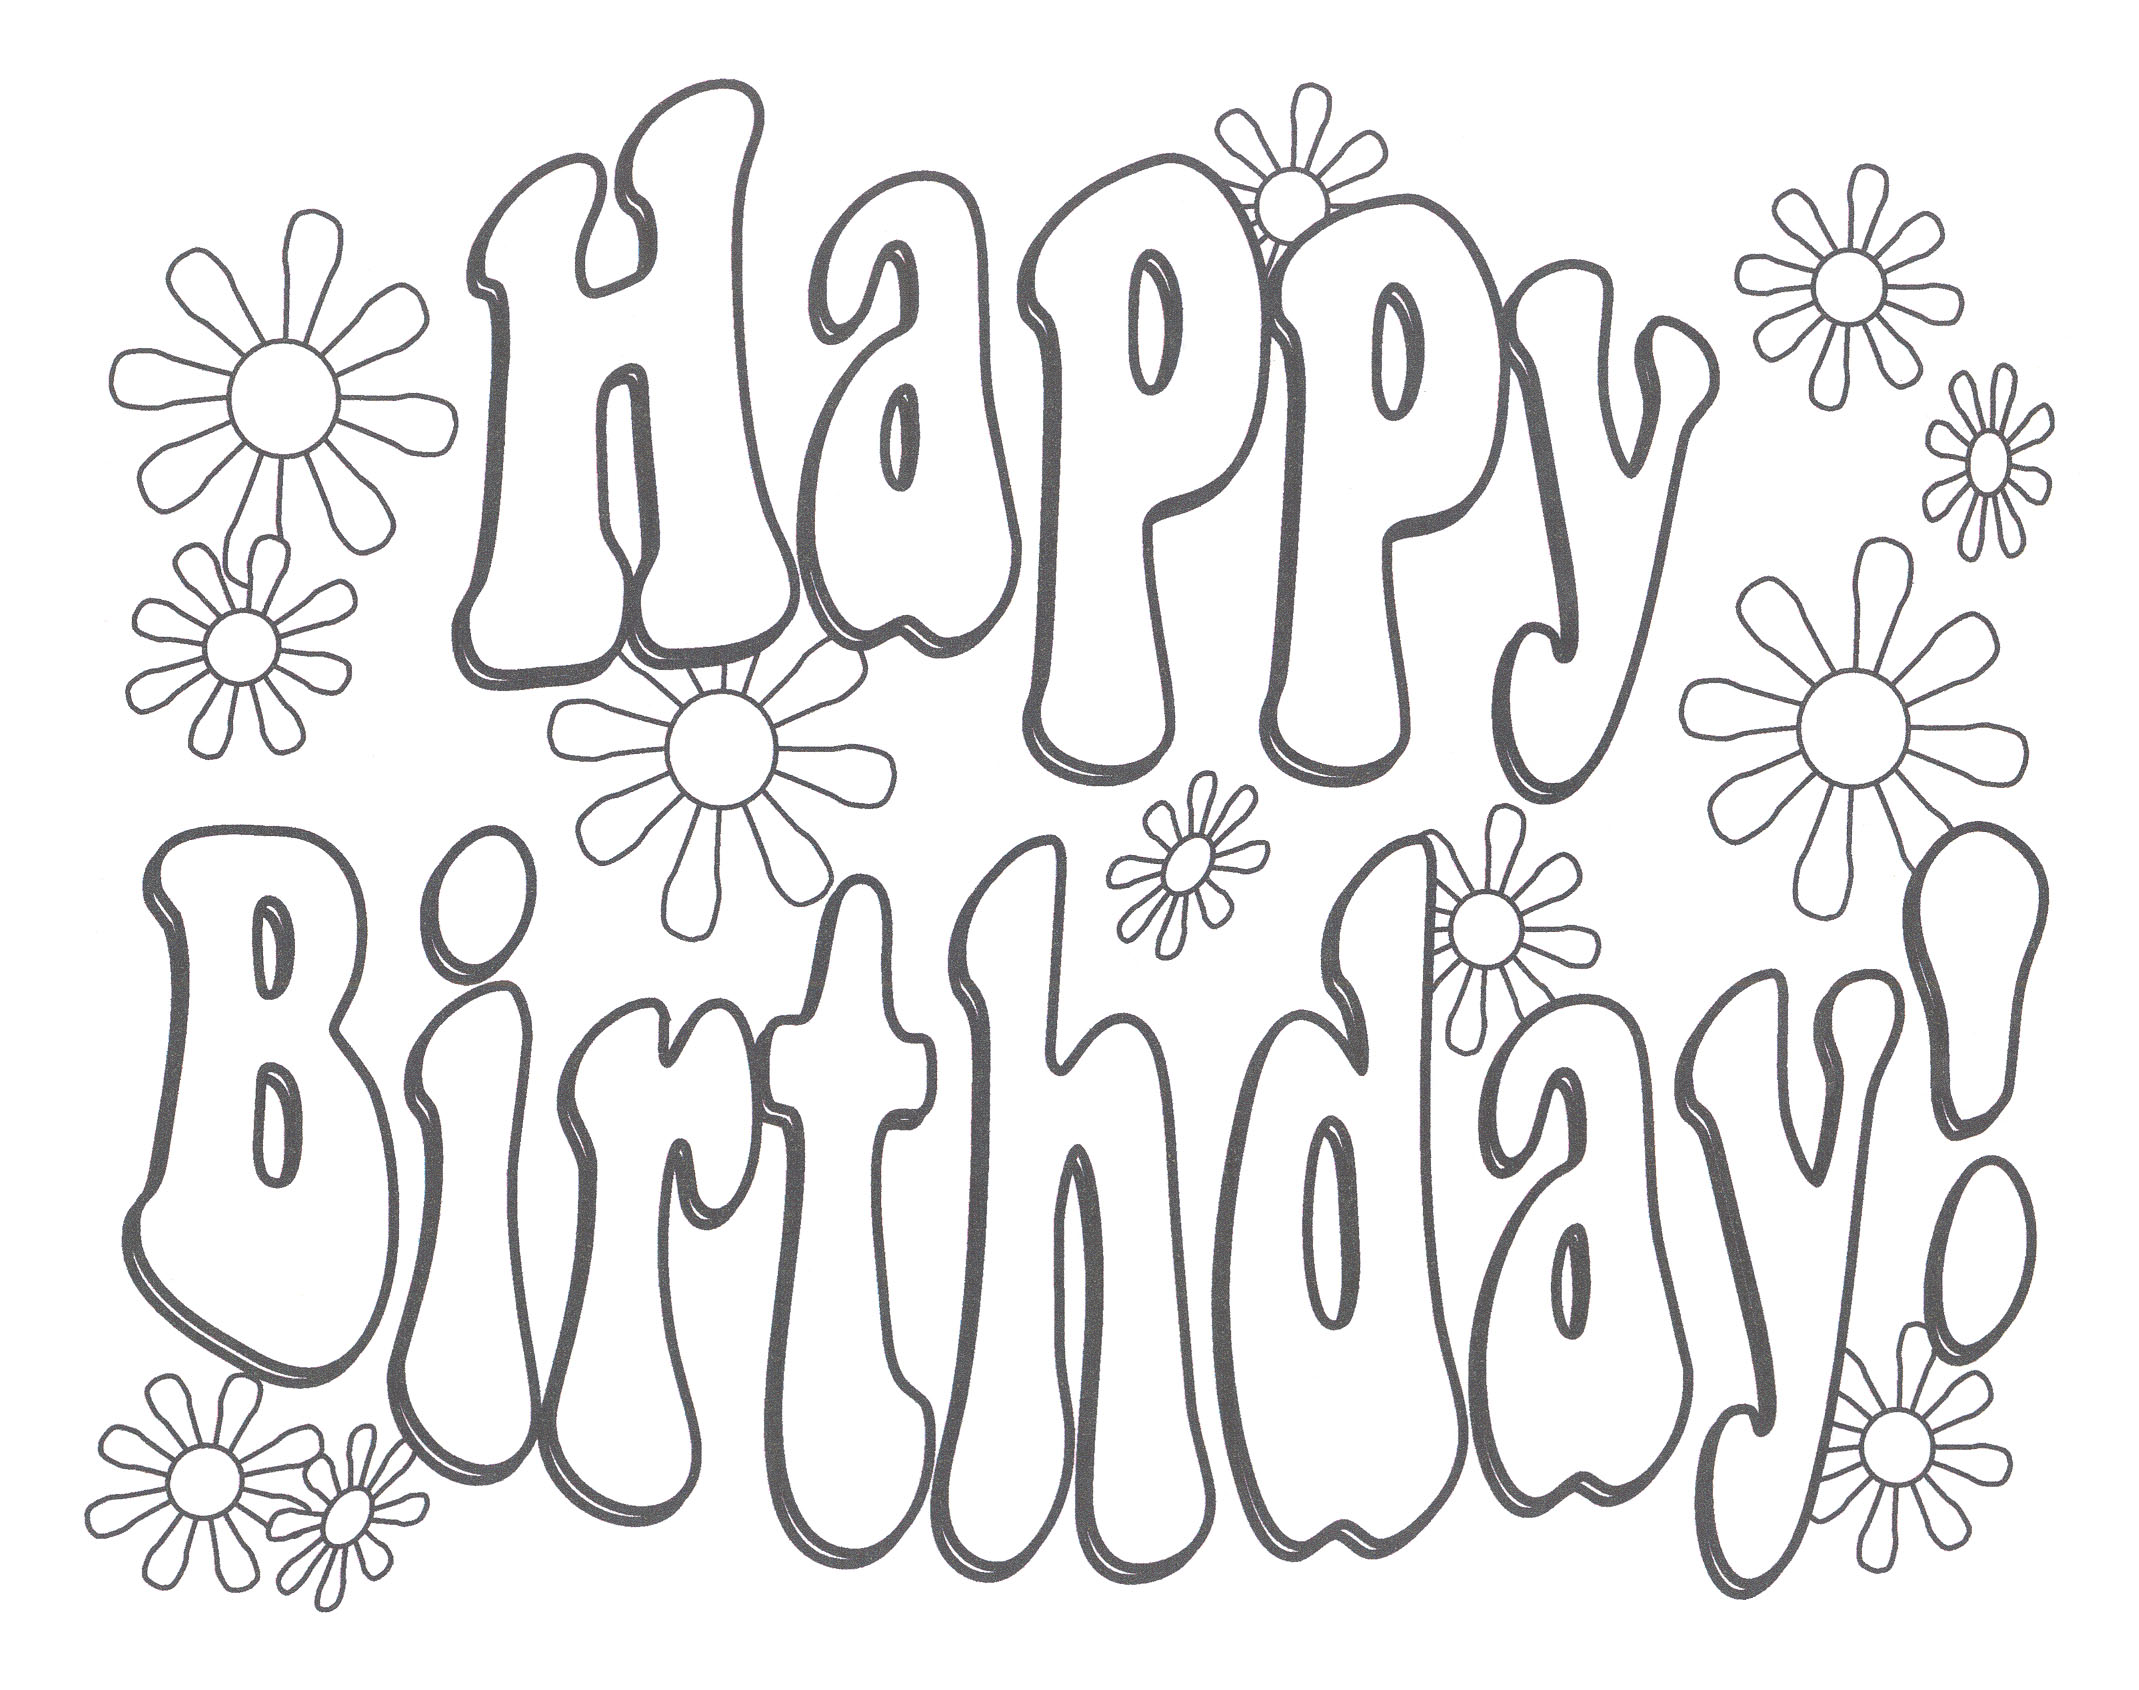 Happy birthday coloring pages to download and print for free